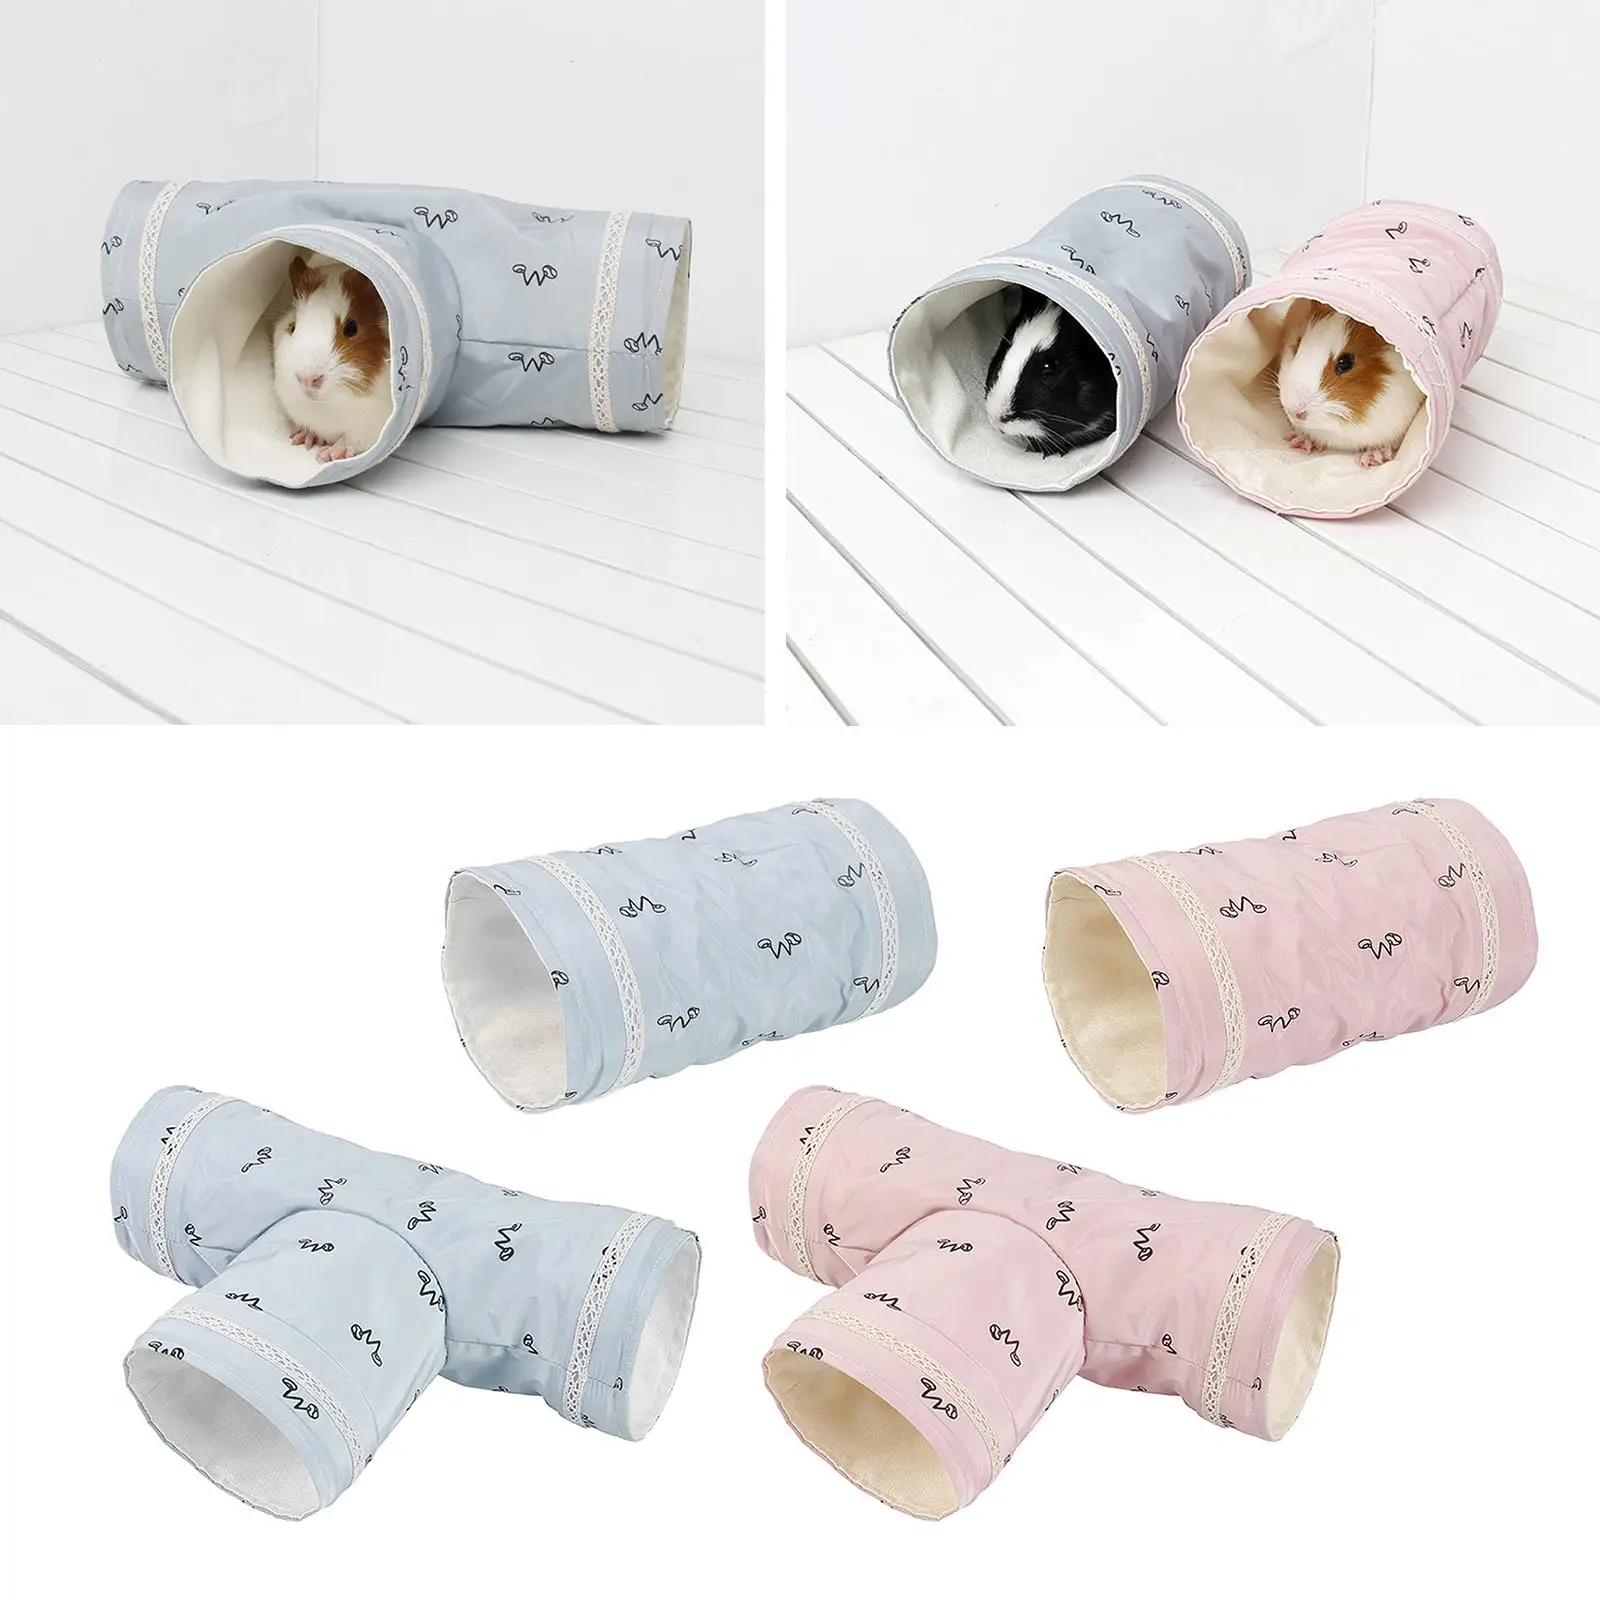 Bunny Tunnels Tubes 2-Way/3-Way Collapsible Bunny Hideout Small Animal Activity Tunnel Toys for Dwarf Rabbits Guinea Pigs Kitty